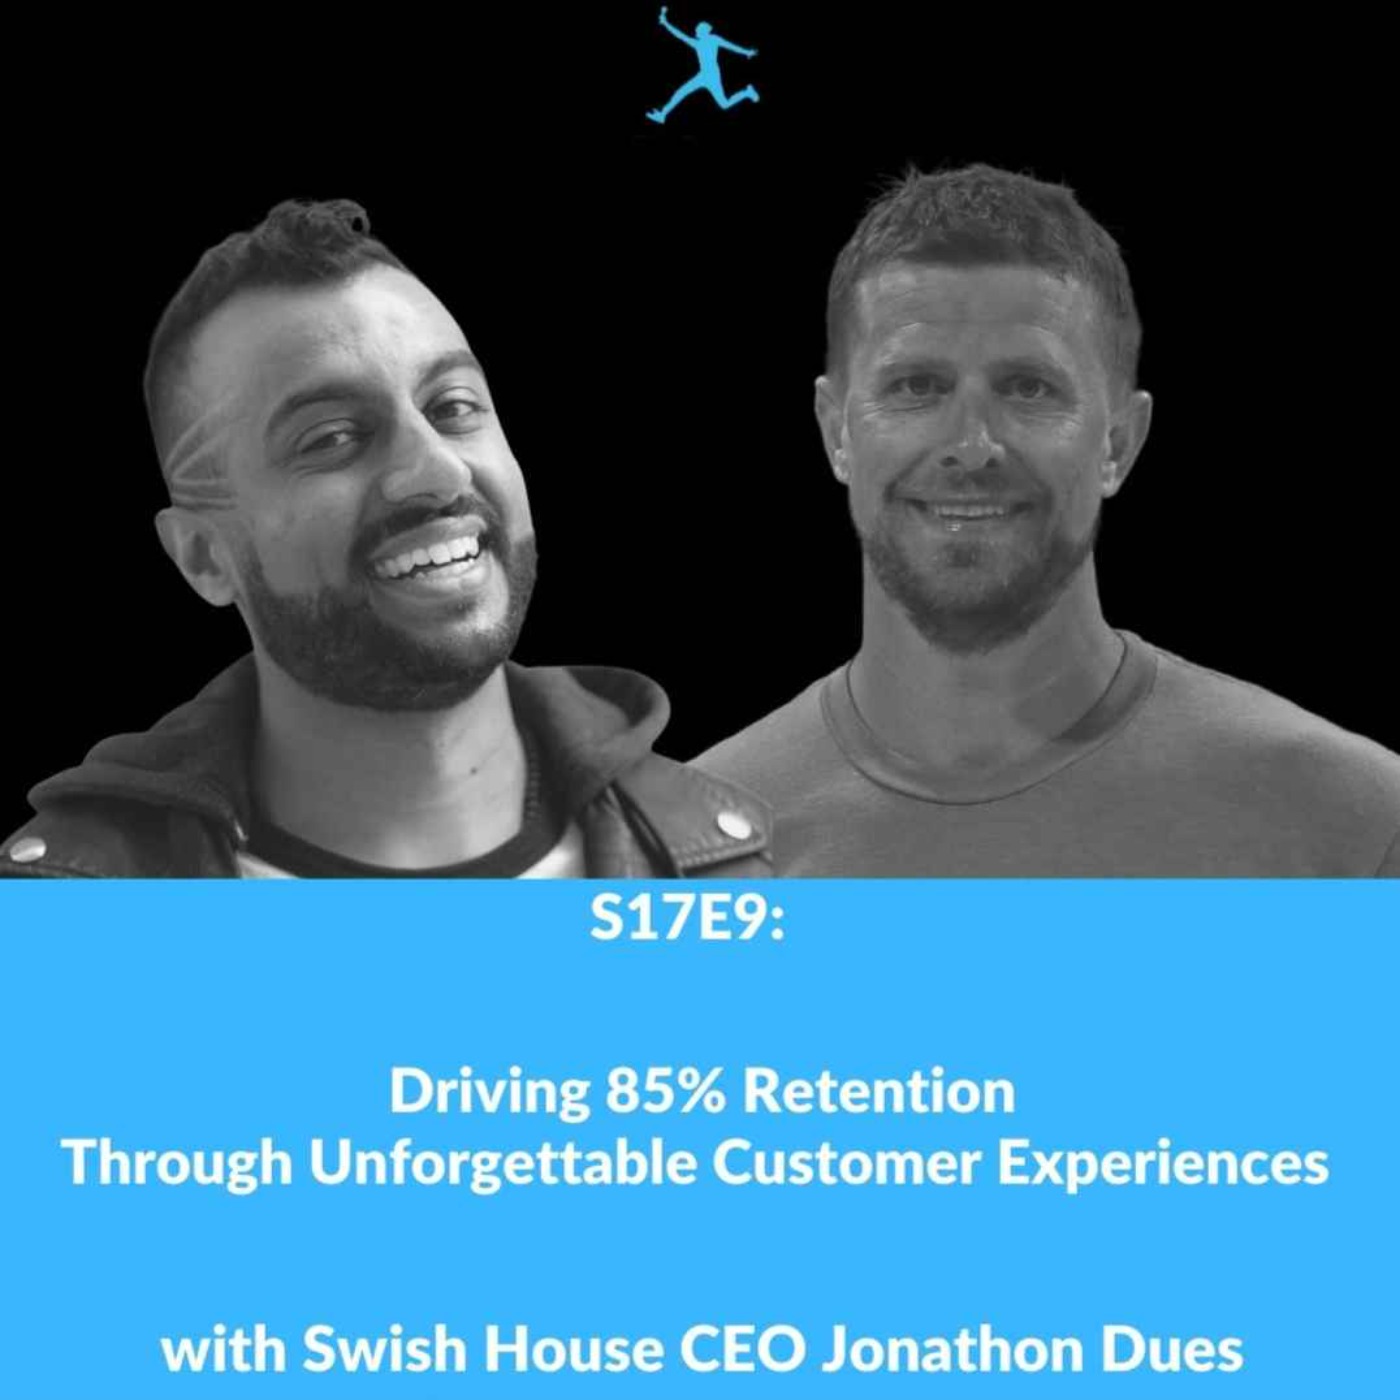 S17E9: Driving 85% Retention Through Unforgettable Customer Experiences with Swish House CEO Jonathon Dues